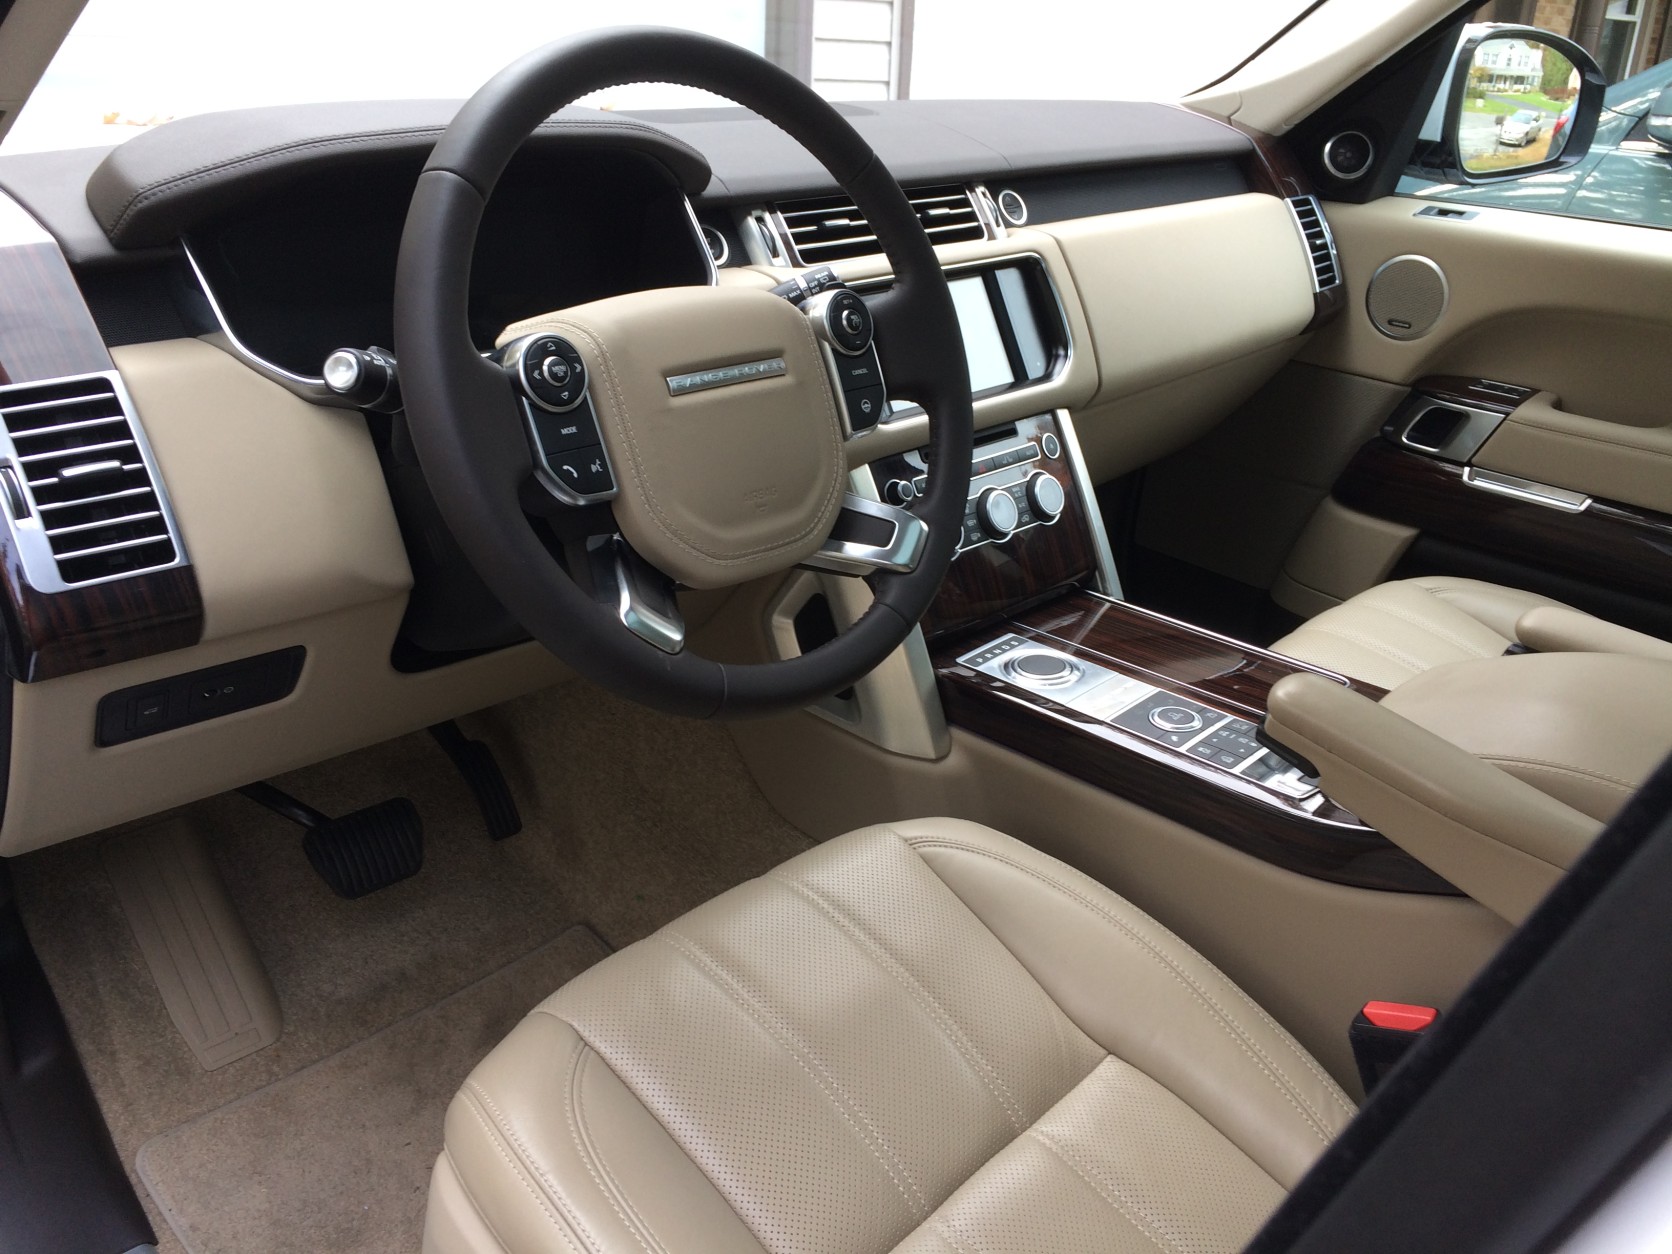 The interior is decked out with Oxford heated and ventilated front seats and various power adjustments to help you get comfortable. The seats are really good for many body types. (WTOP/Mike Parris)